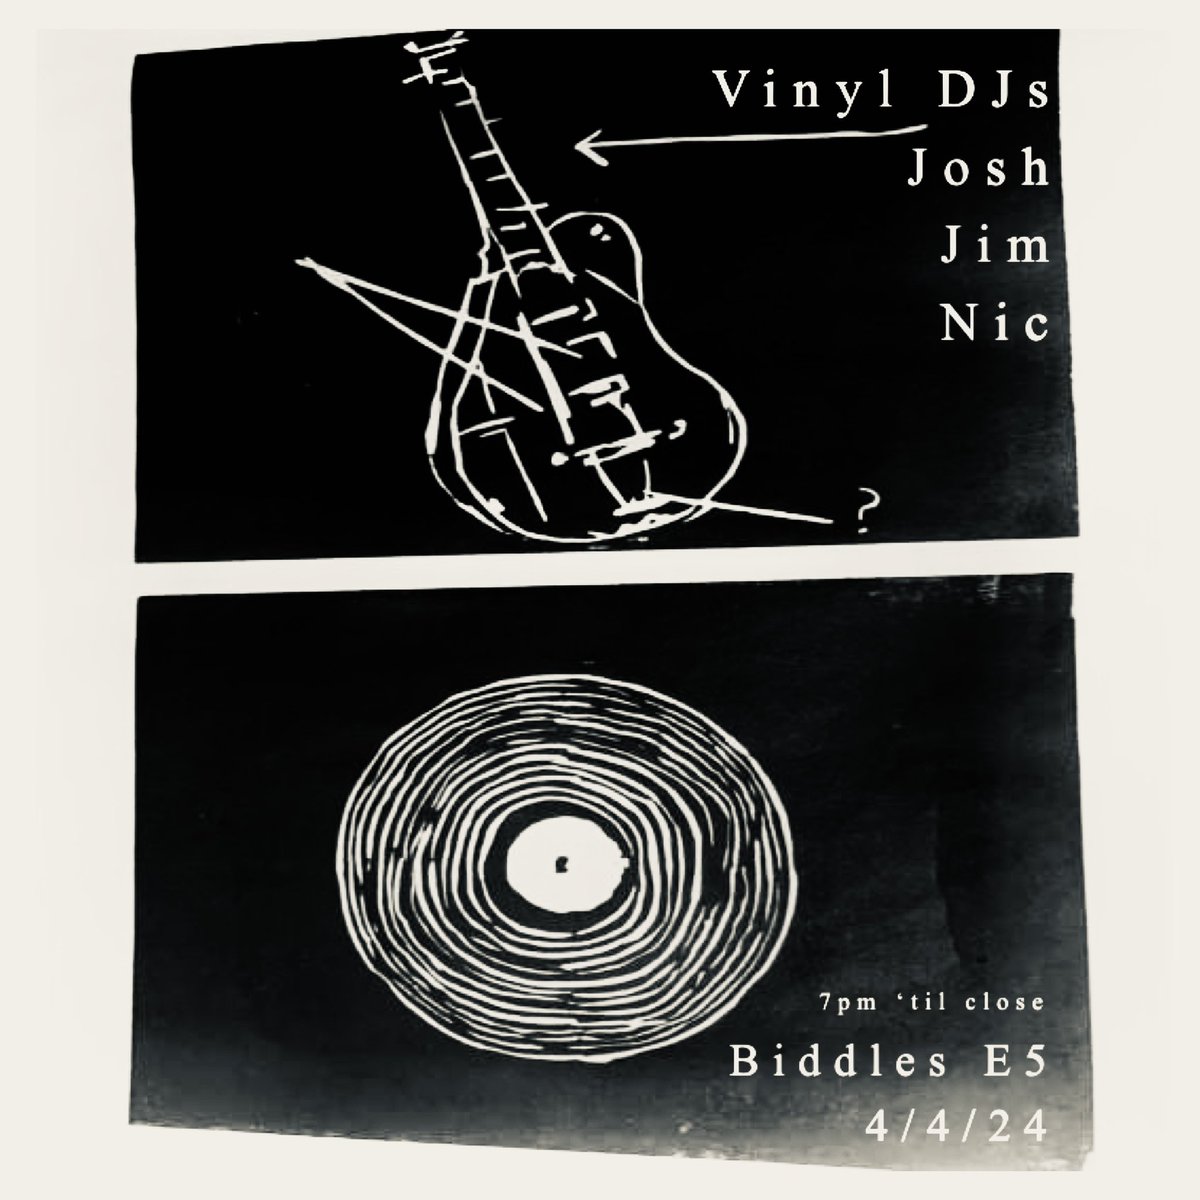 Playing records in Biddles with my pals next Thursday. Delving into the fruits of years of eclectic record collecting as a result of old-fashioned digging, discovery and the odd algorithm suggestion. Come x @BiddleBros @joshclarke #vinyl #dj #records